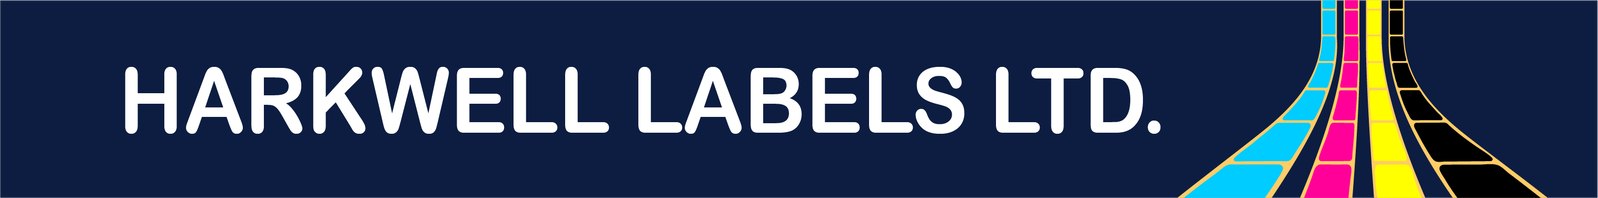 Logo of HARKWELL LABELS - Product Labels, Label Printing, Label Manufacturers, Dorset Labels And Tags In Poole, Dorset